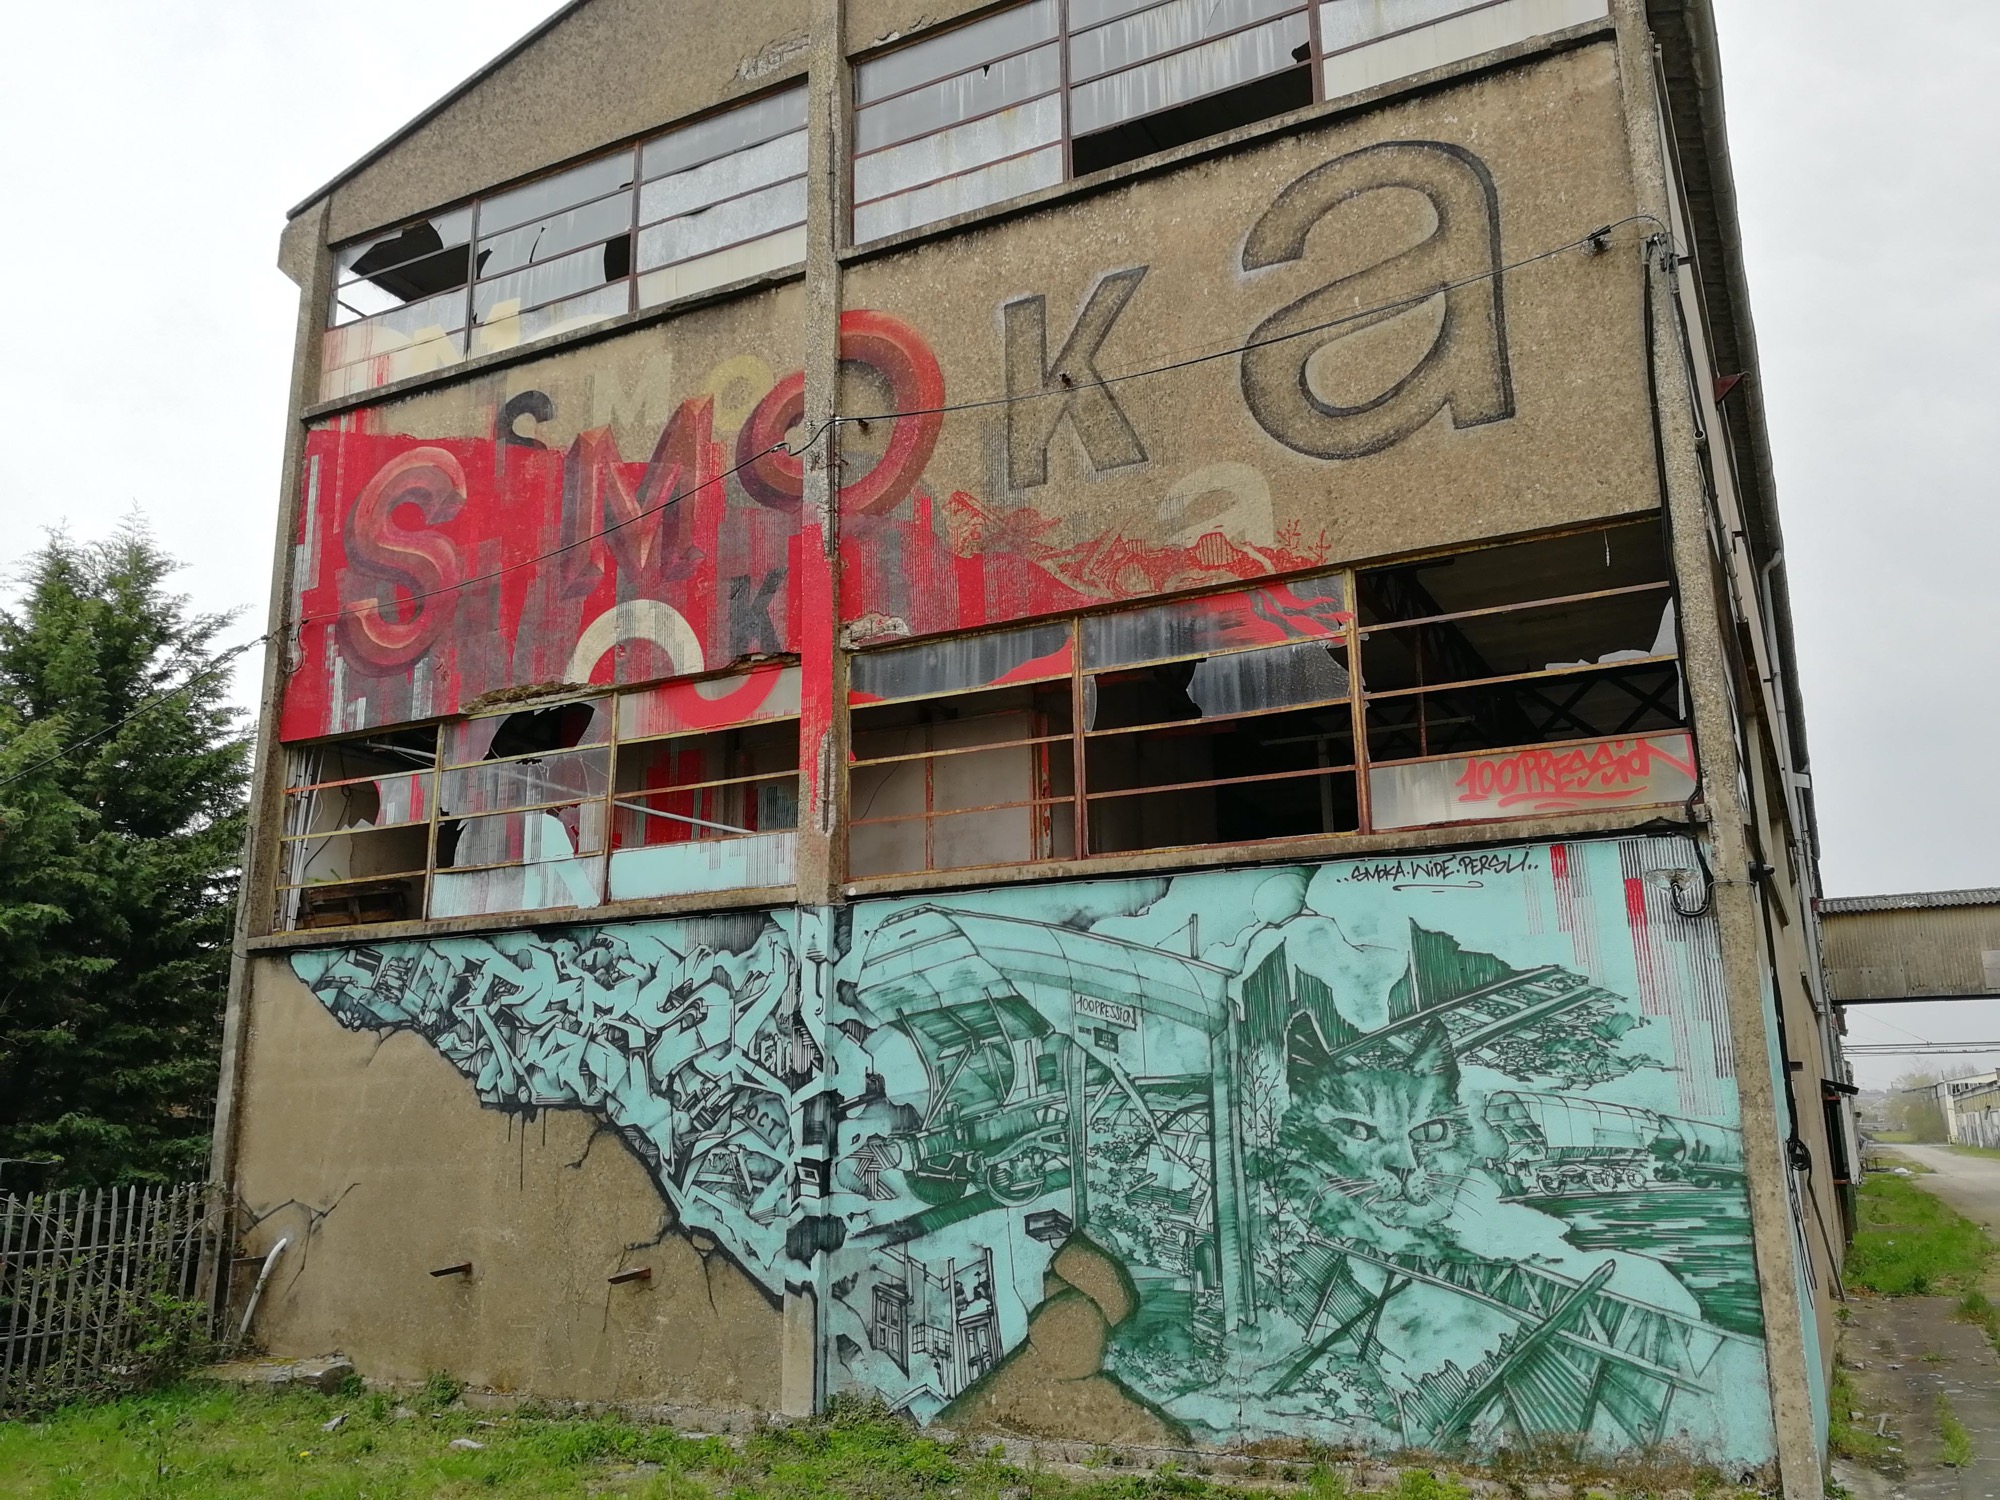 Graffiti 1369  by the artist Smoka captured by Rabot in Issé France